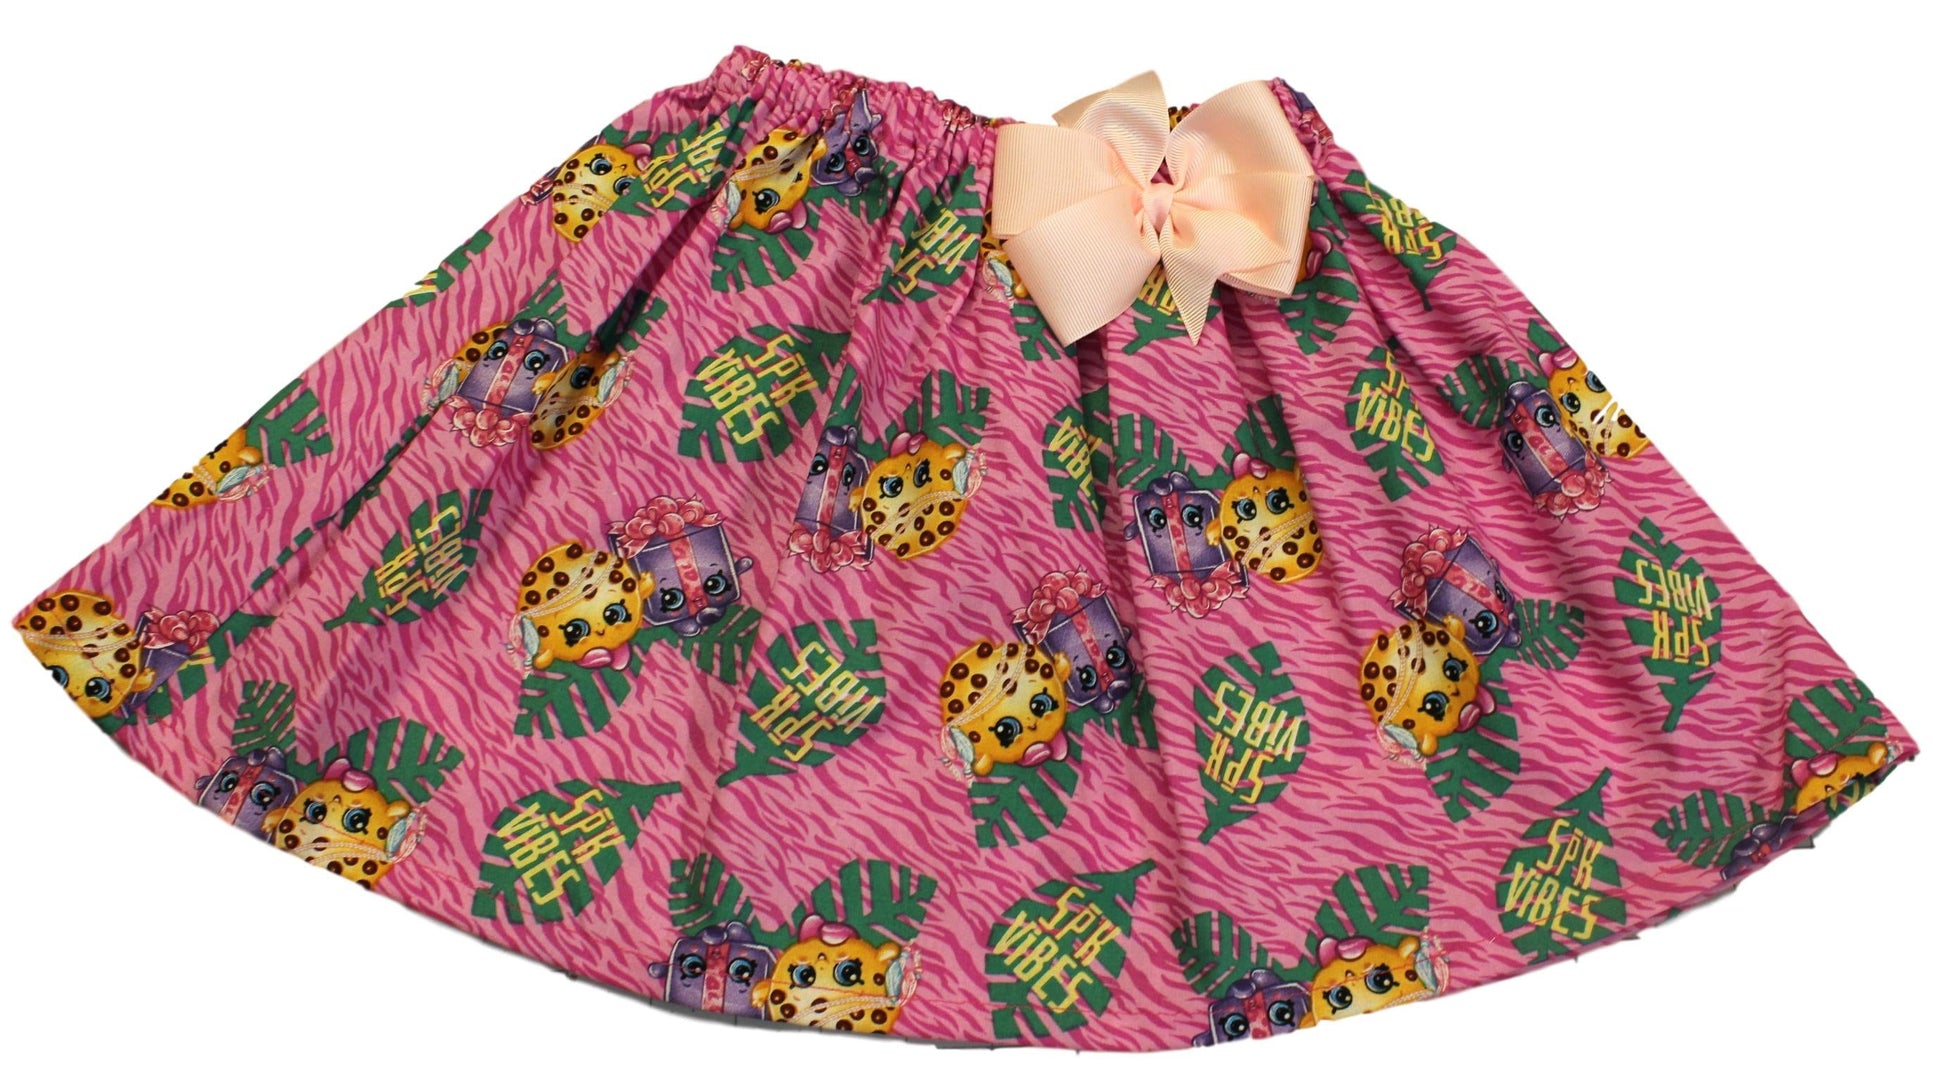 SHOPKINS BIRTHDAY OUTFIT skirt